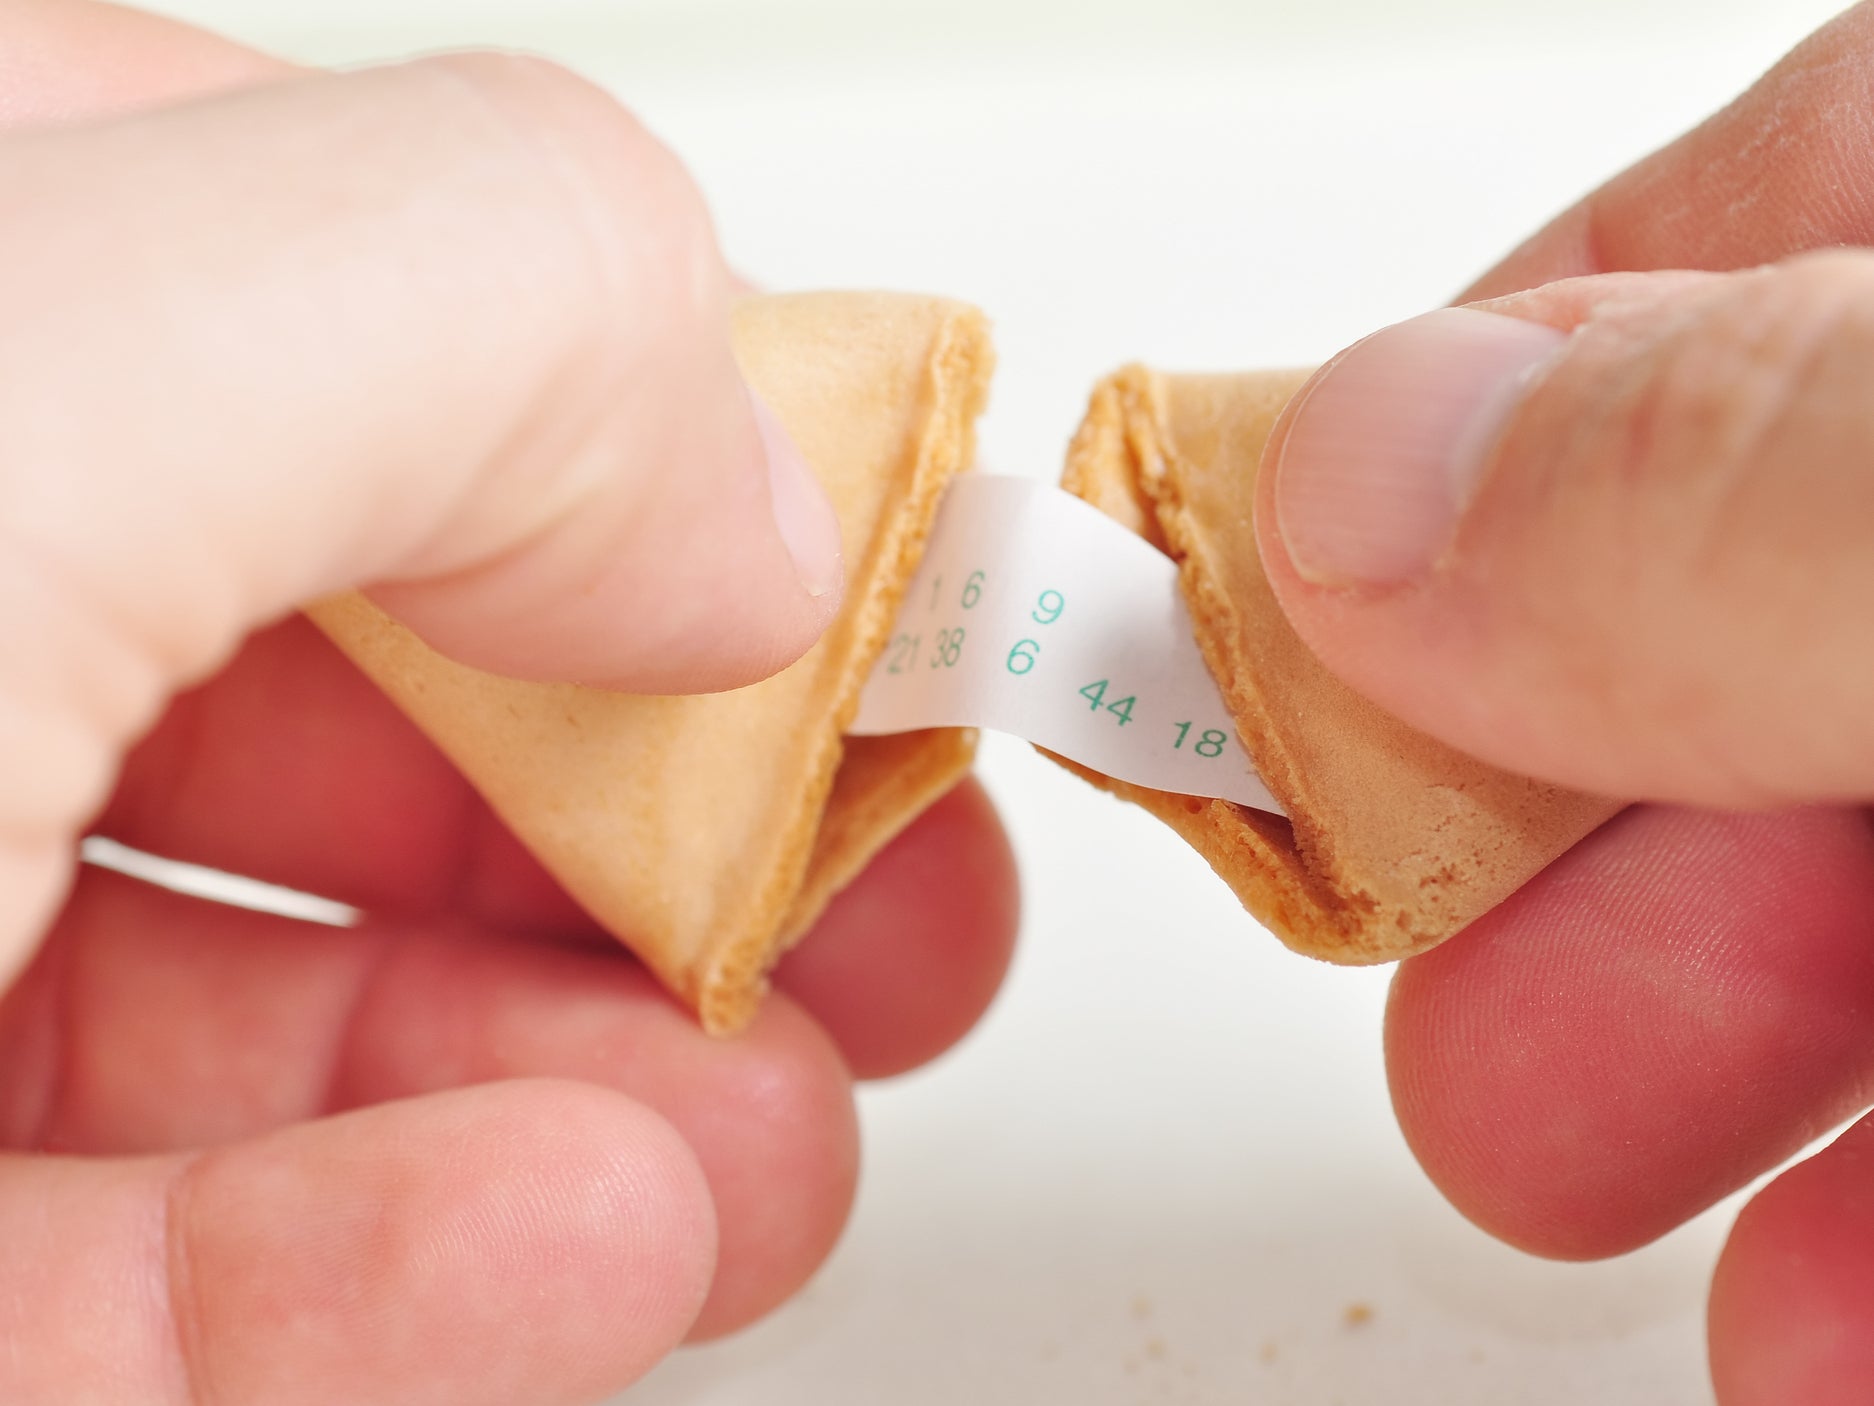 A man wins lottery jackpot after using fortune cookie numbers